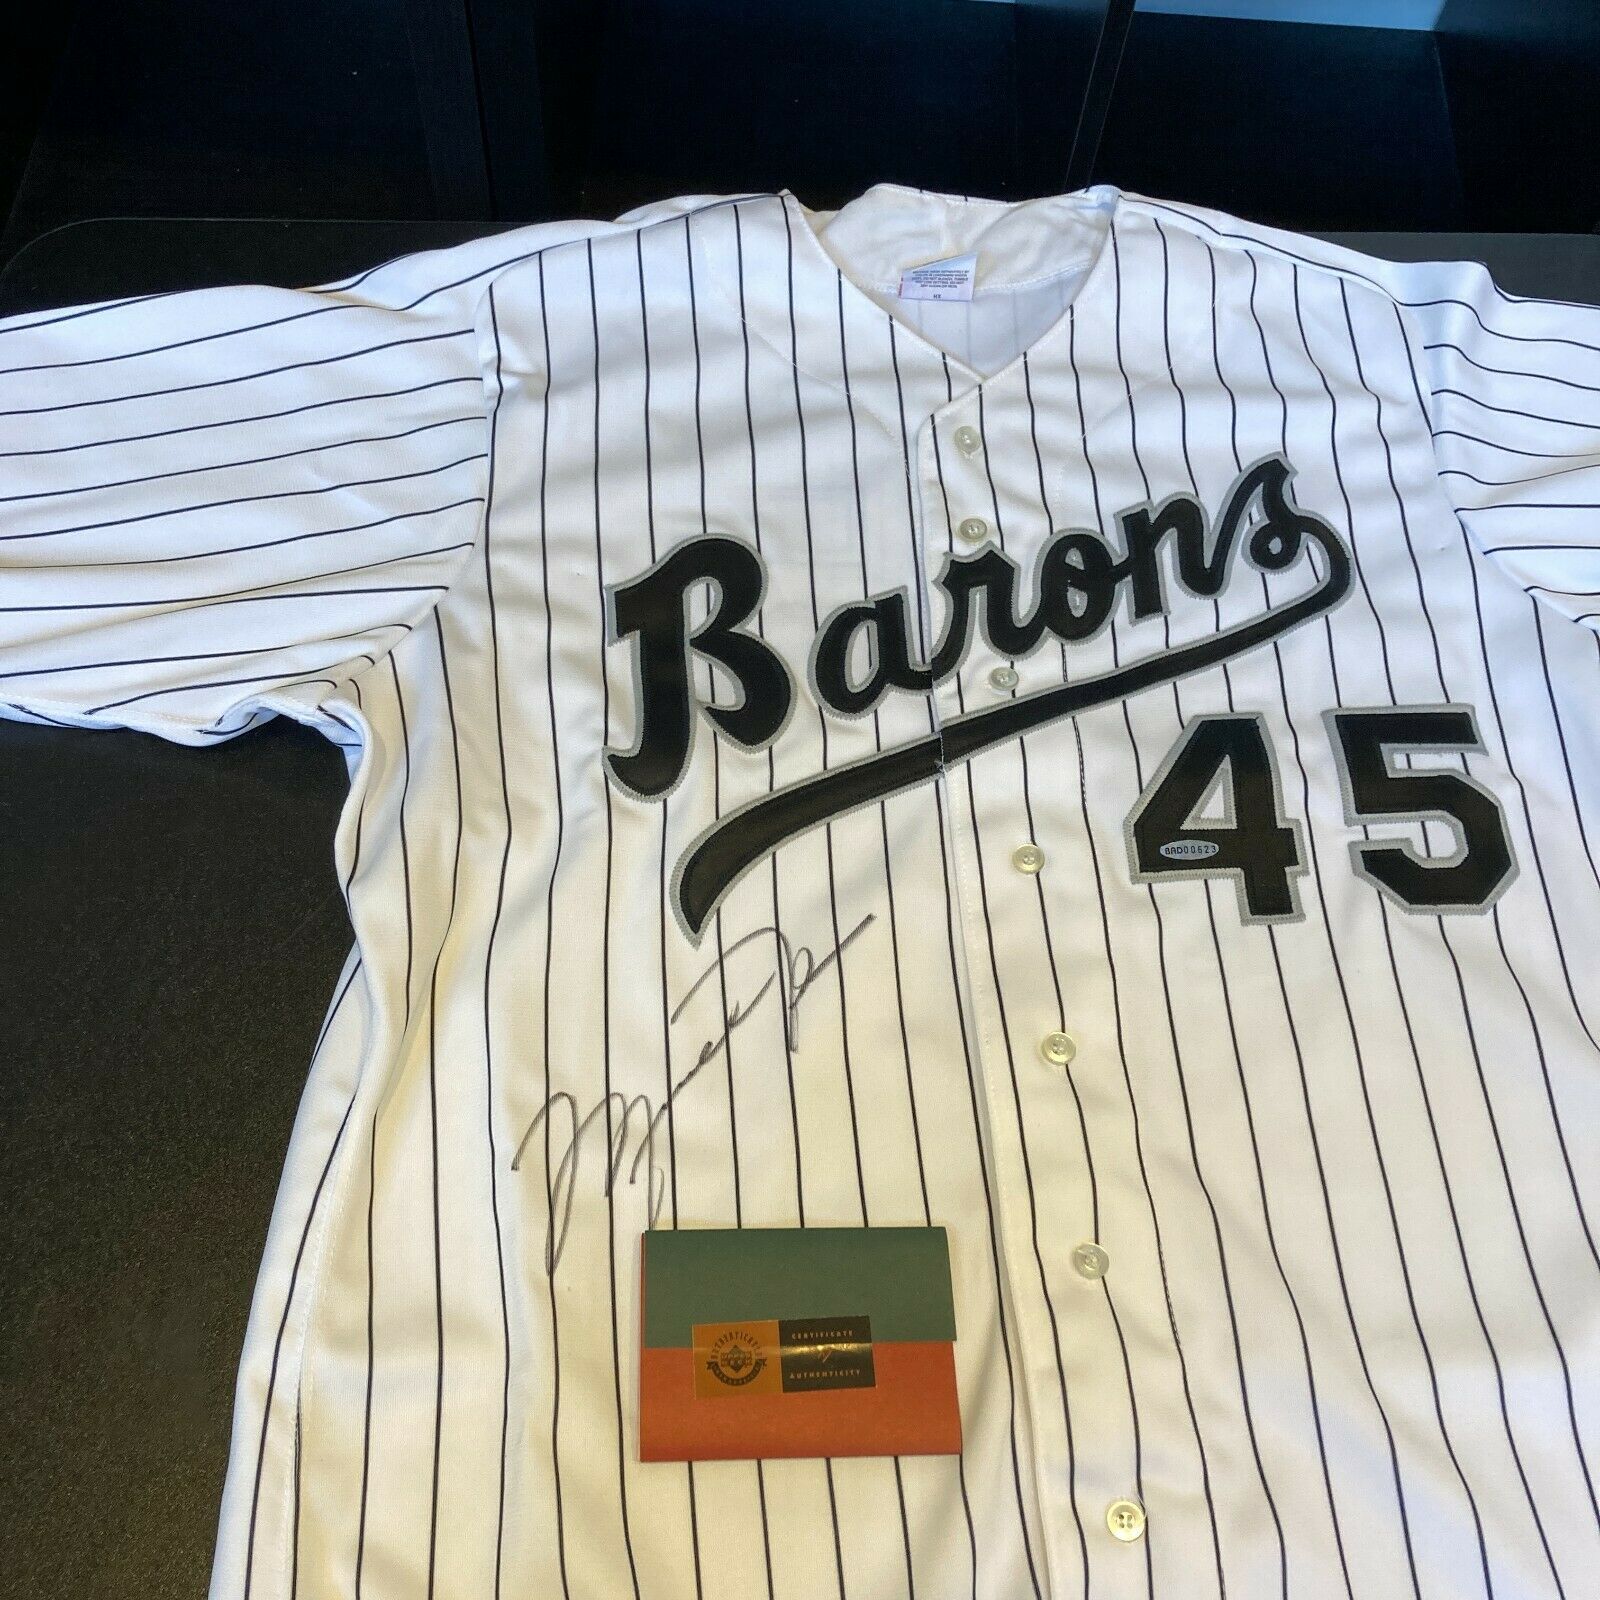 Michael Jordan Chicago White Sox Autographed White Jersey - Limited Edition  164 of 250 - Upper Deck